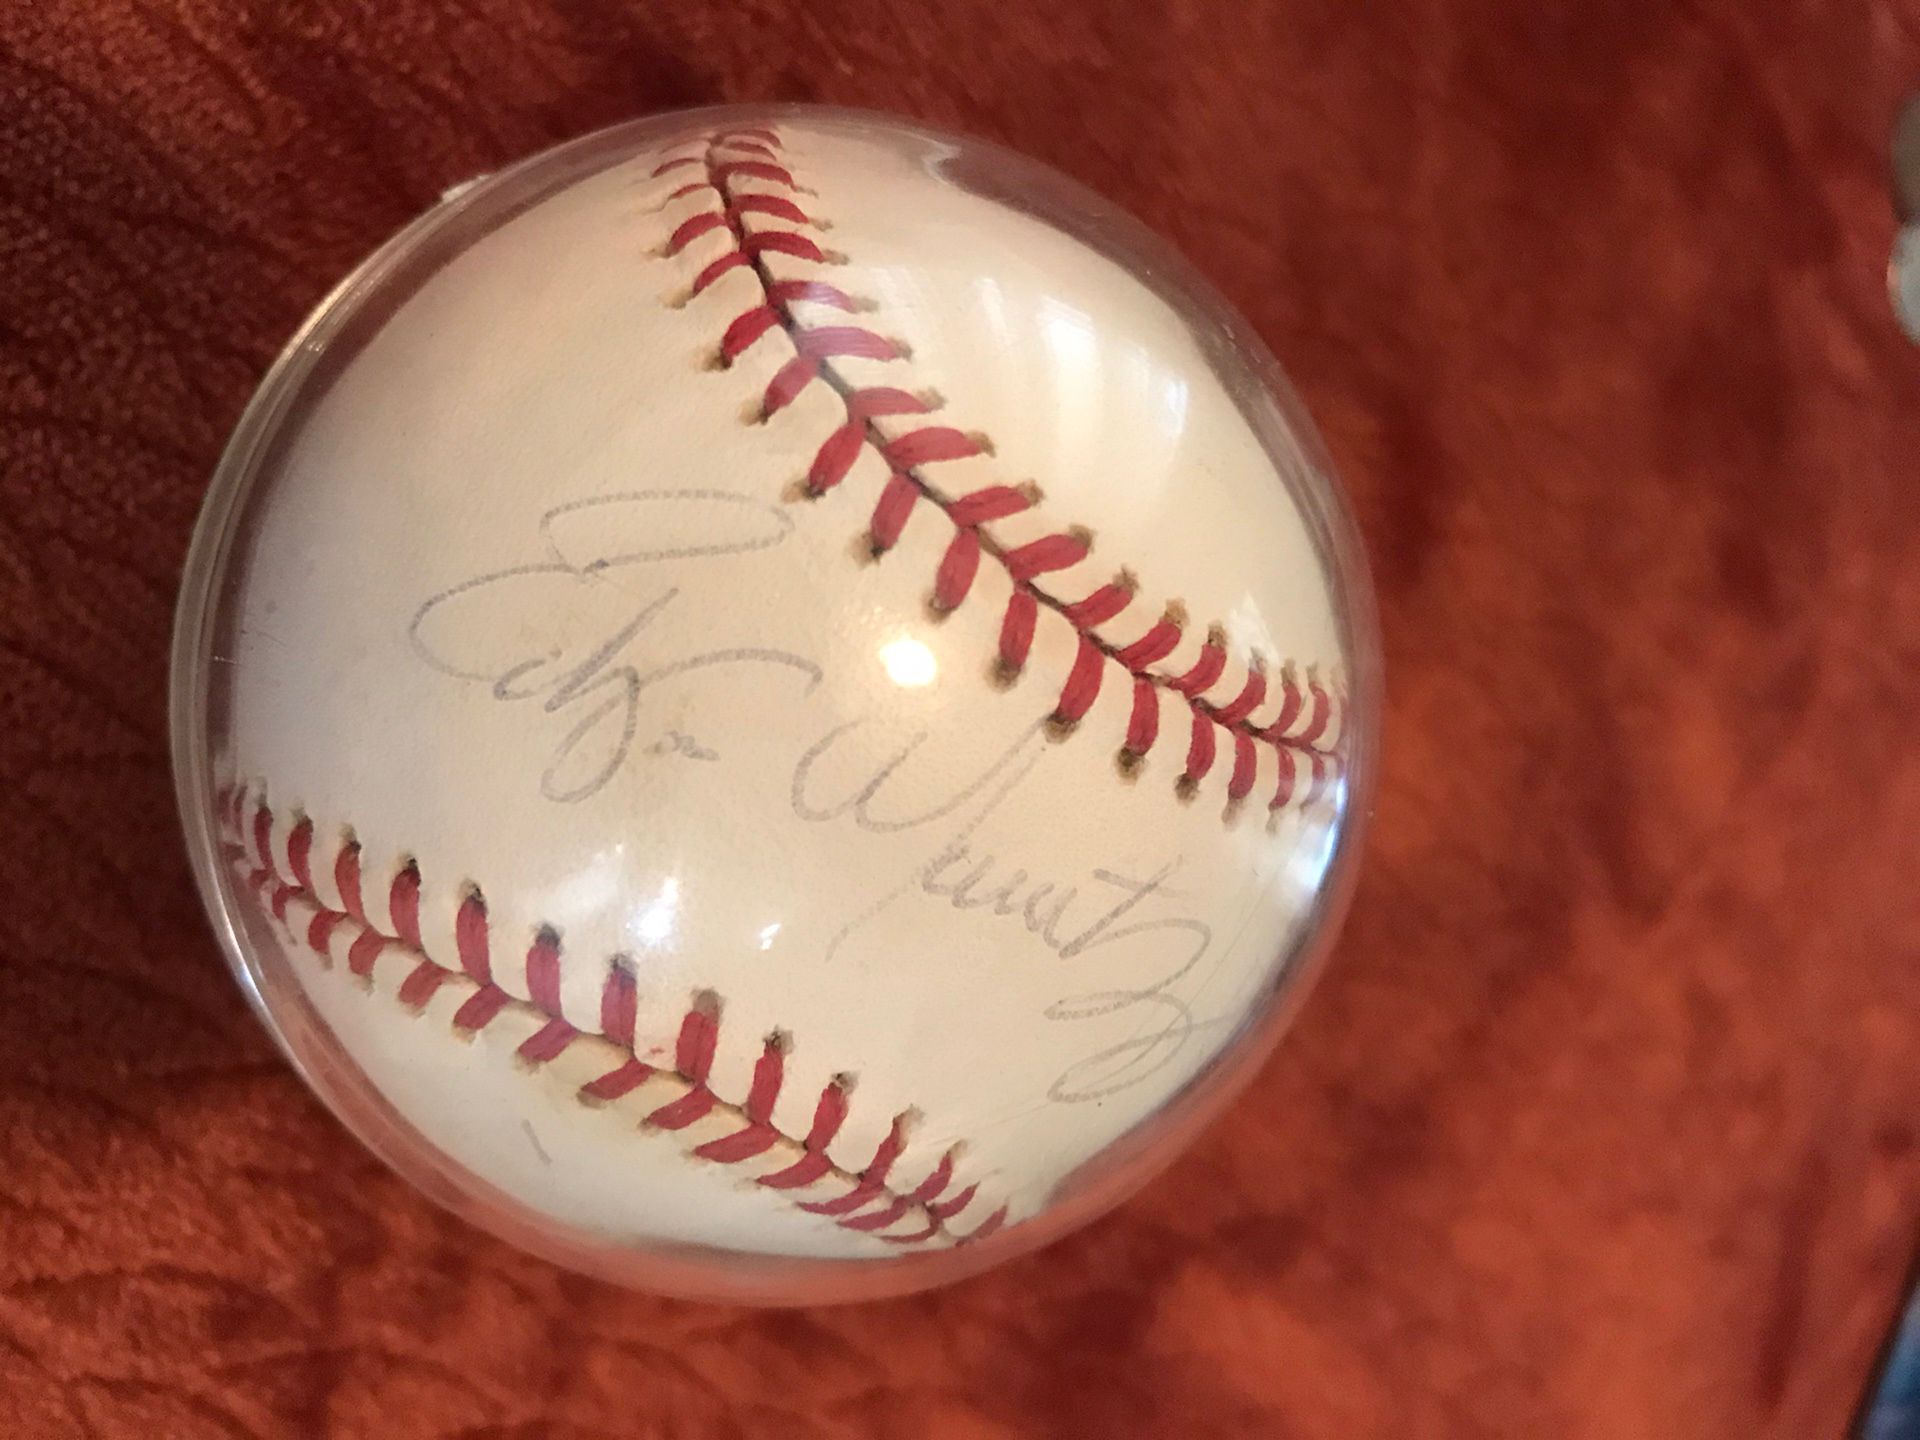 Edgar Martinez-signed baseball for Sale in Woodway, WA - OfferUp